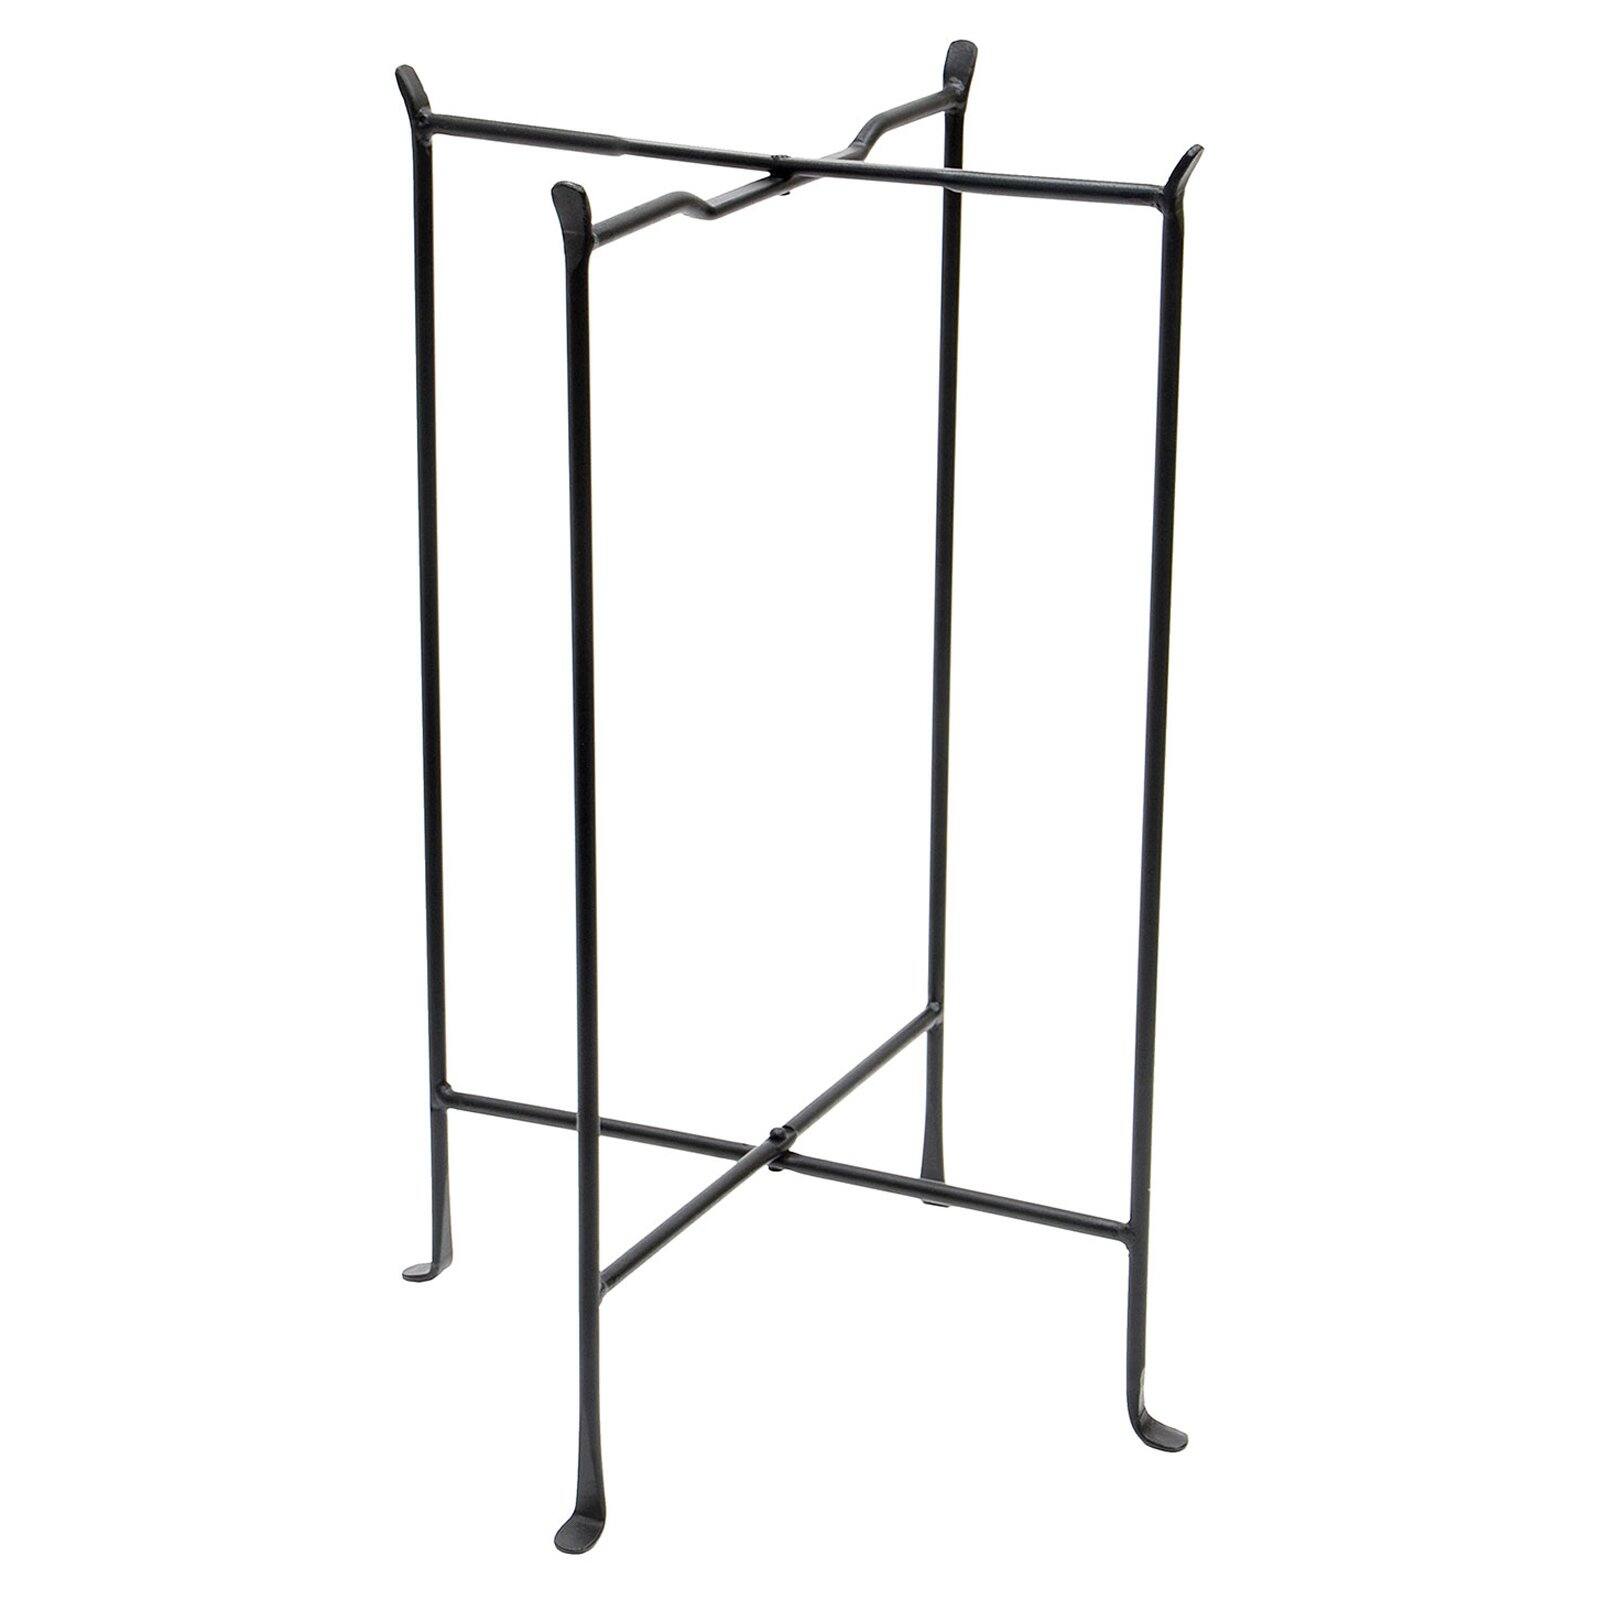 Achla Designs Tall Folding Plant Stand, Black, 29"H - image 2 of 4